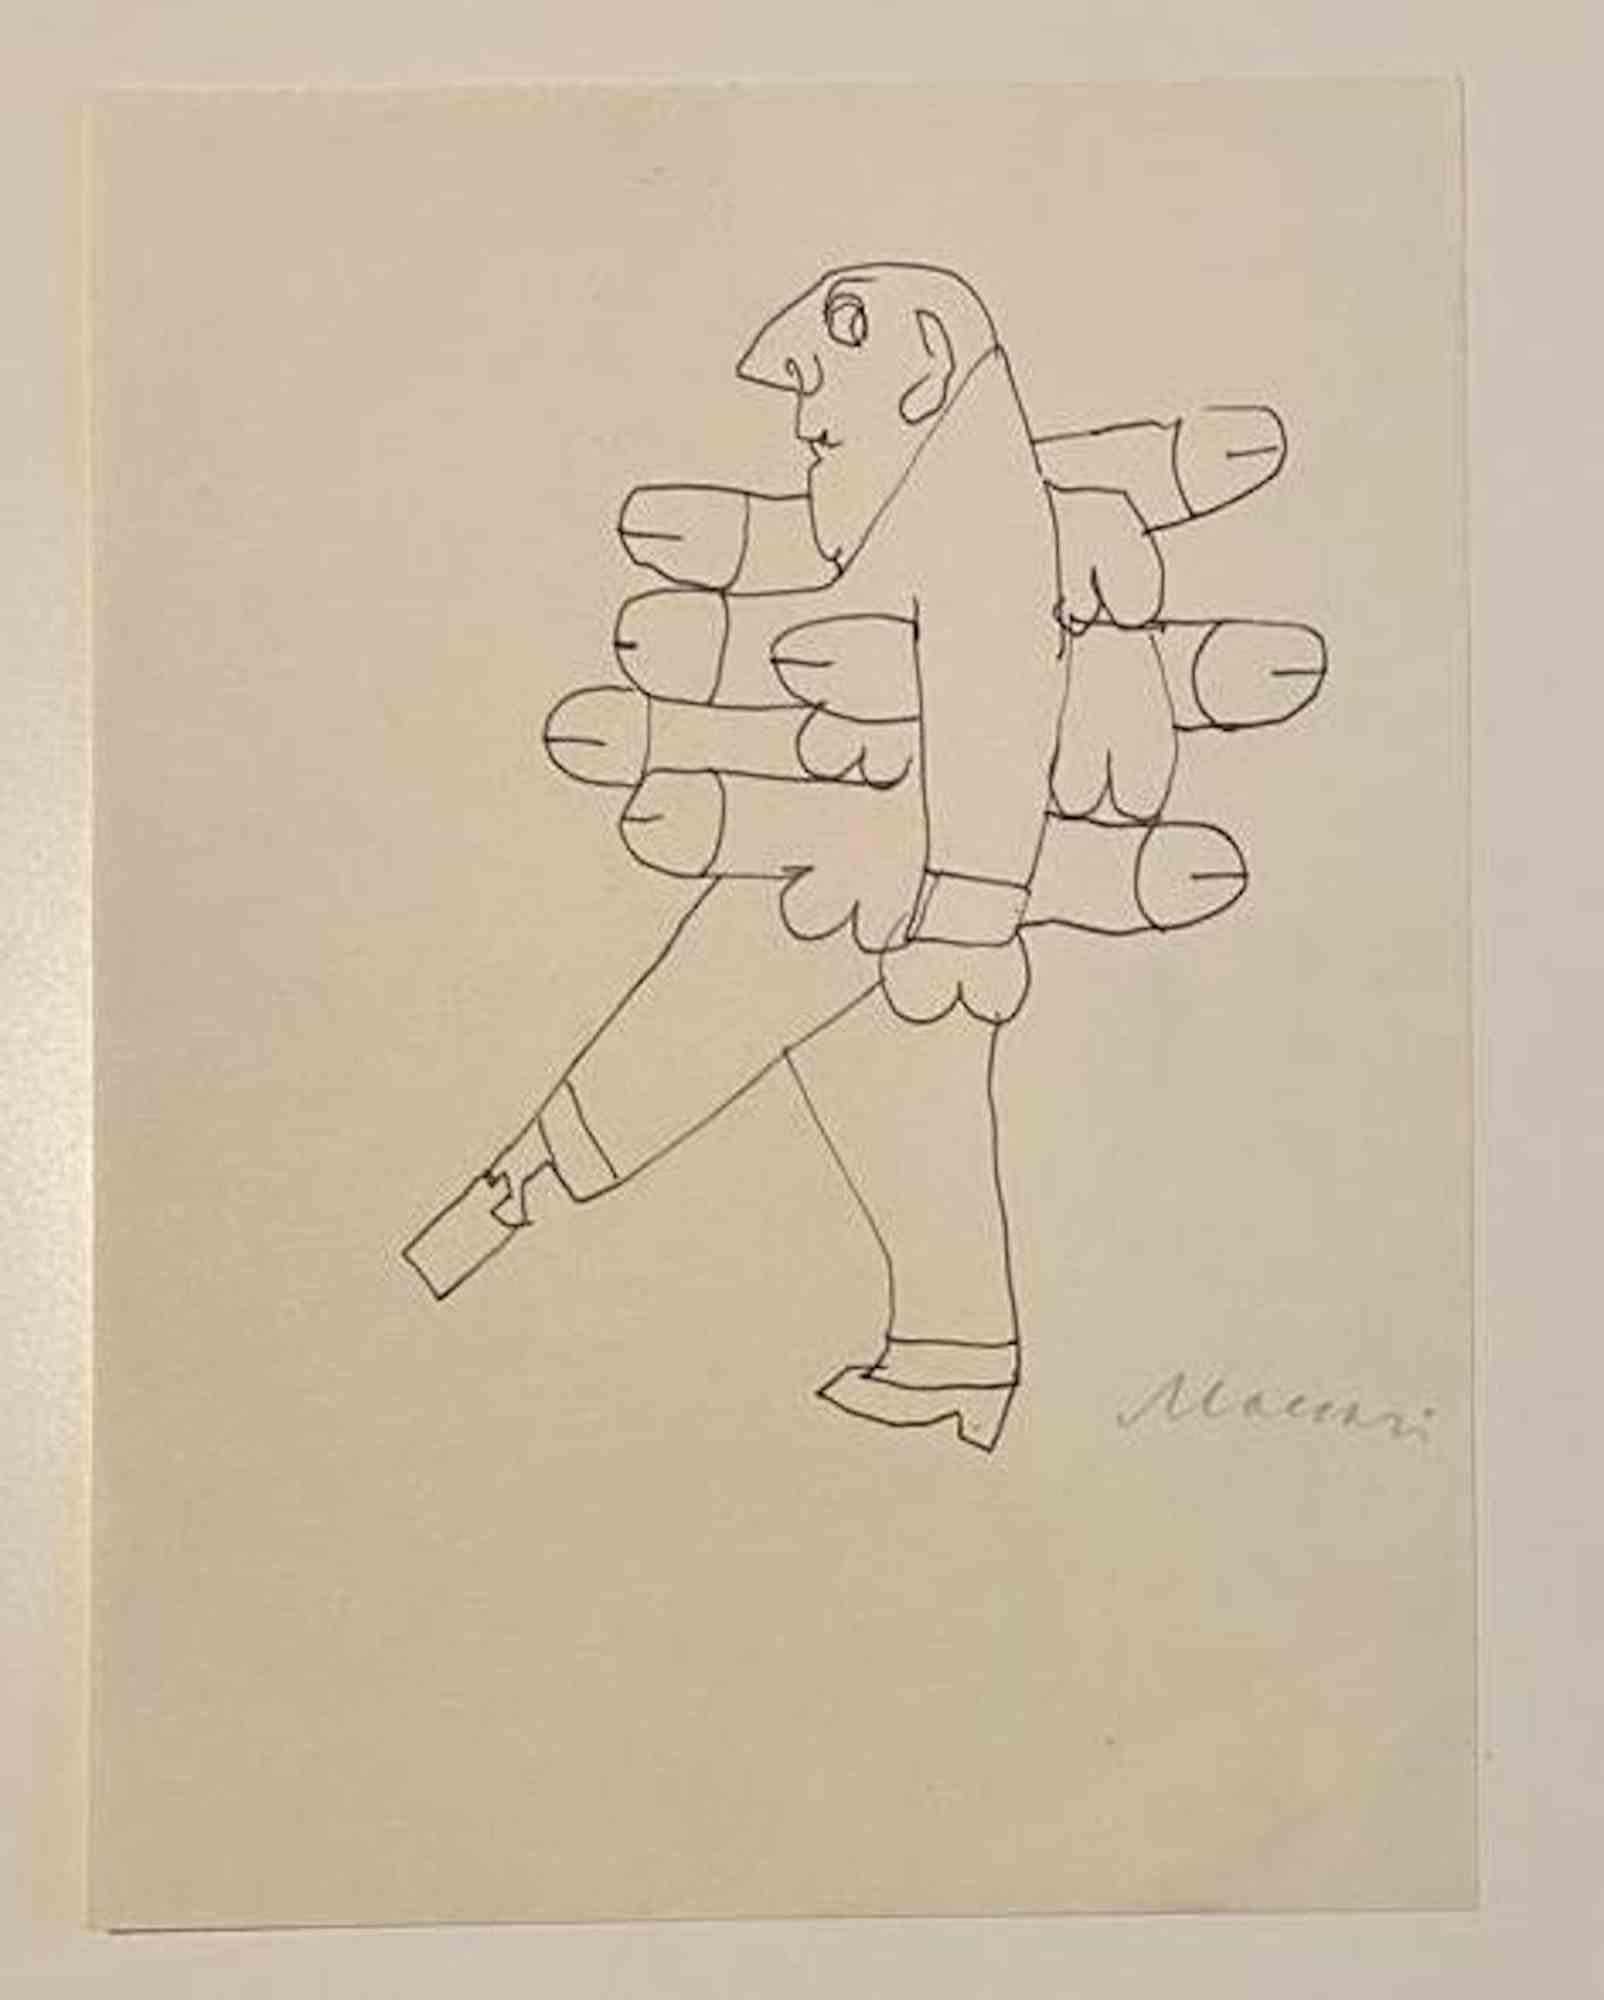 In Troubles is a Pen Drawing realized by Mino Maccari  (1924-1989) in the Mid-20th Century.

Hand-signed on the lower.

Good conditions.

Mino Maccari (Siena, 1924-Rome, June 16, 1989) was an Italian writer, painter, engraver and journalist, winner